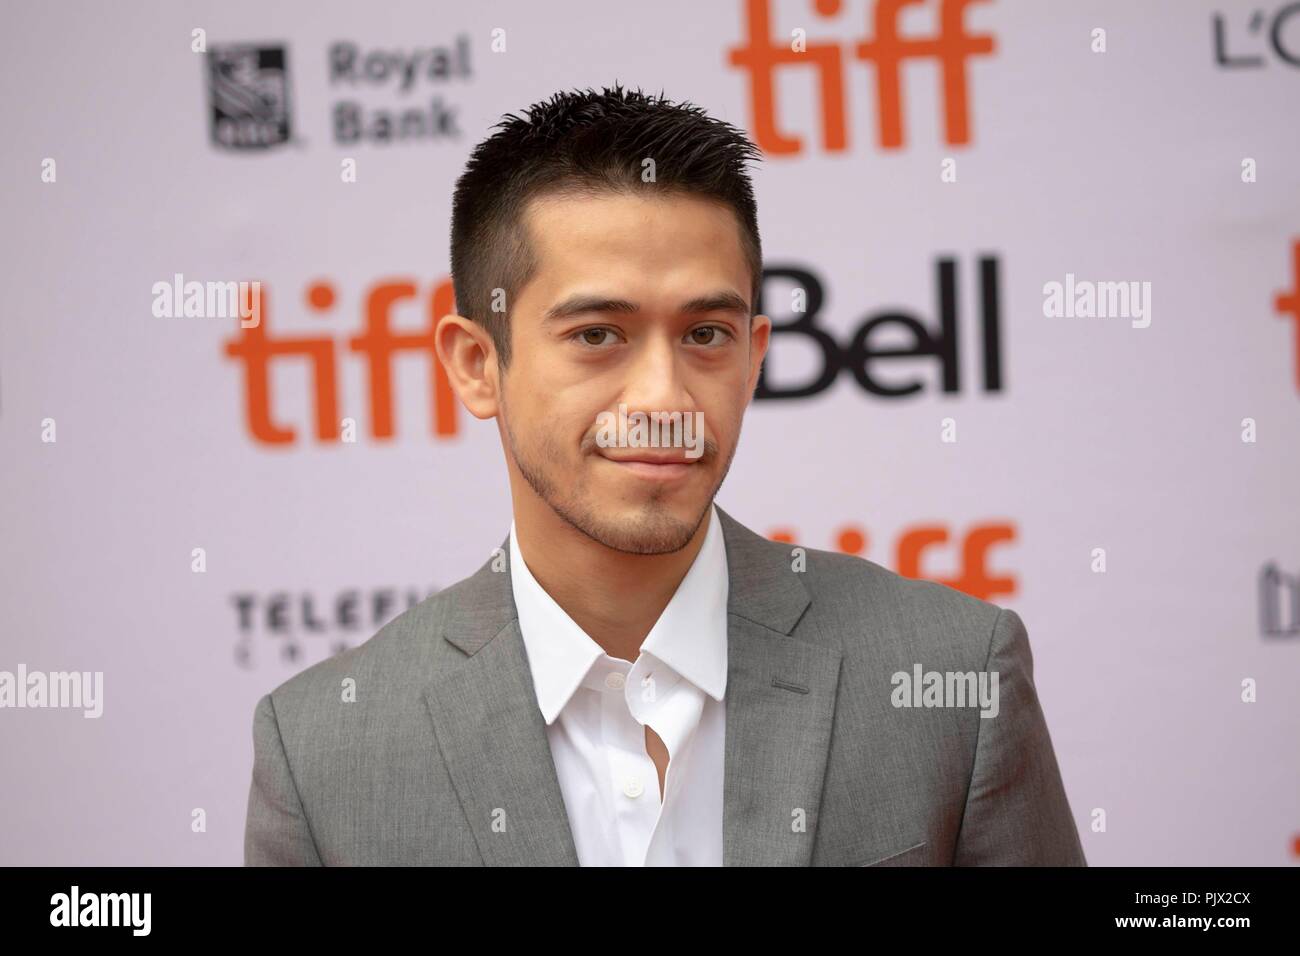 Toronto, Canada. 8th September 2018. David Zaldivar attends the premiere of 'Ben Is Back' during the 43rd Toronto International Film Festival, tiff, at Princess of Wales Theatre in Toronto, Canada, on 08 September 2018. | usage worldwide Credit: dpa picture alliance/Alamy Live News Stock Photo